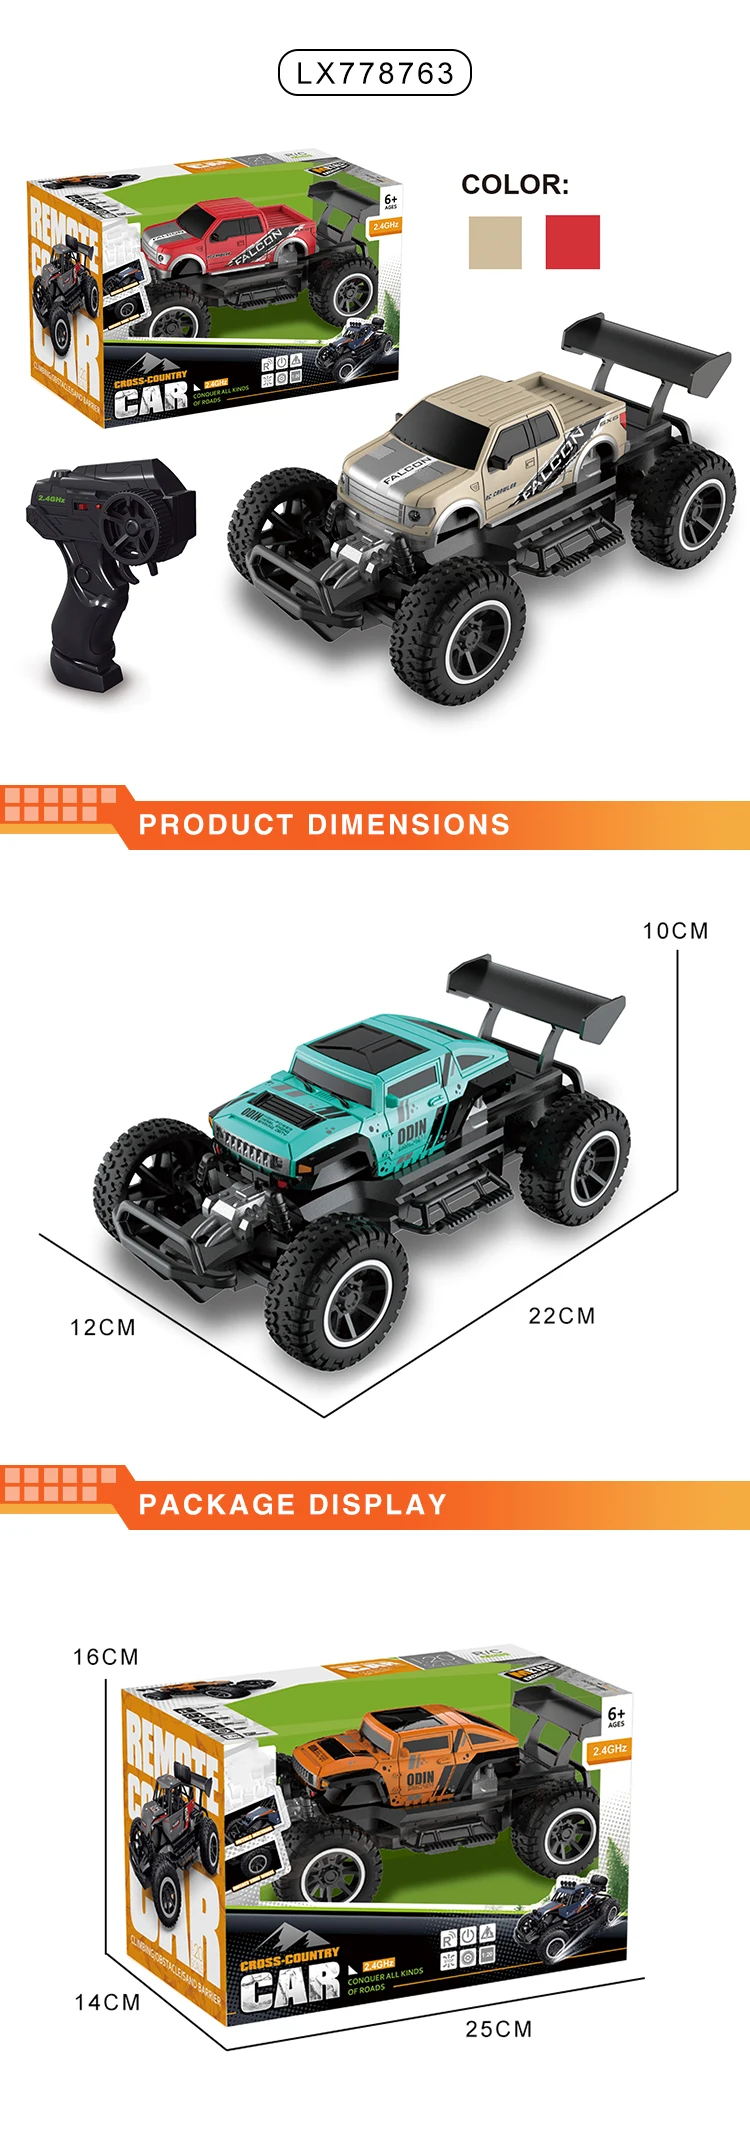 1:20 2.4GHz High Speed Scale Off-road Vehicle Remote Control Cross Country Car Toys